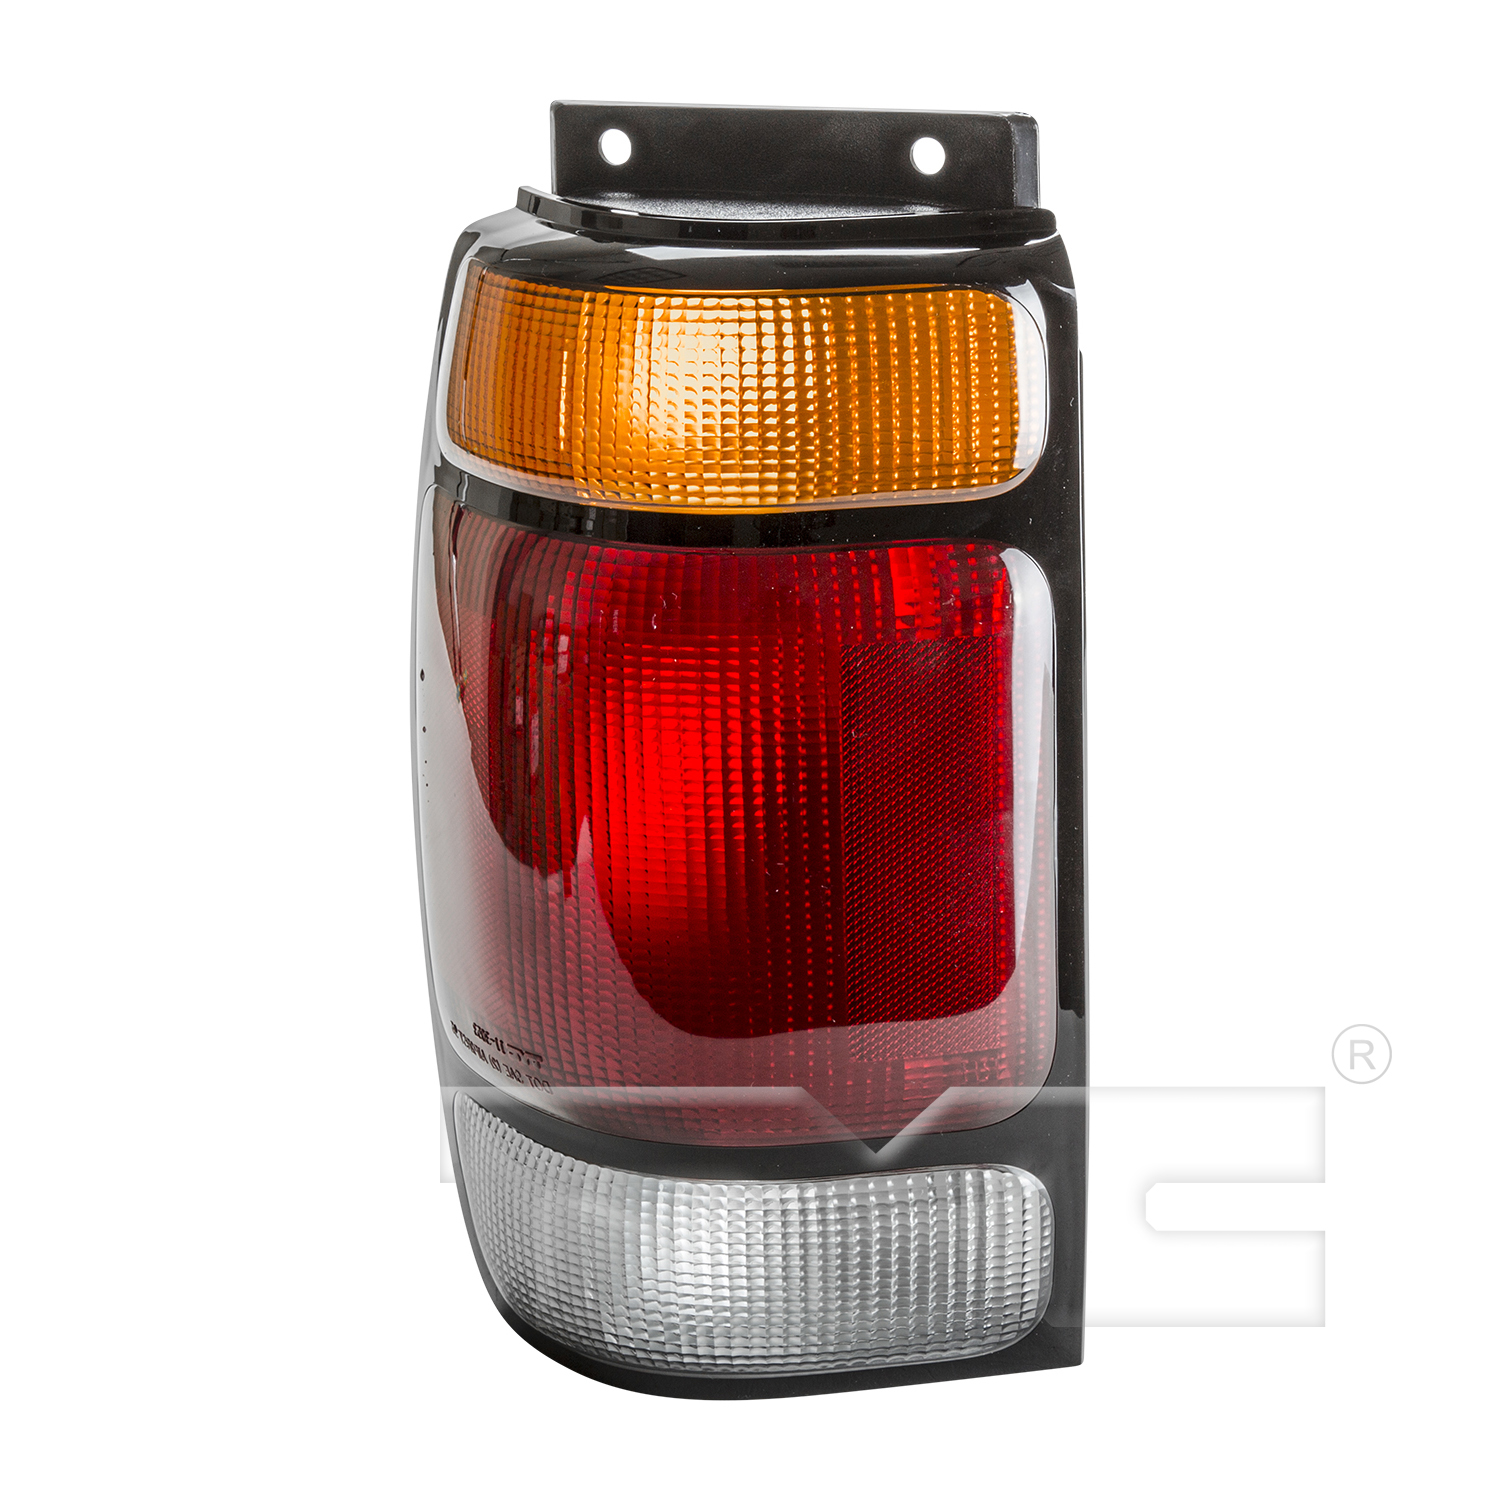 Aftermarket TAILLIGHTS for FORD - EXPLORER, EXPLORER,95-97,LT Taillamp assy